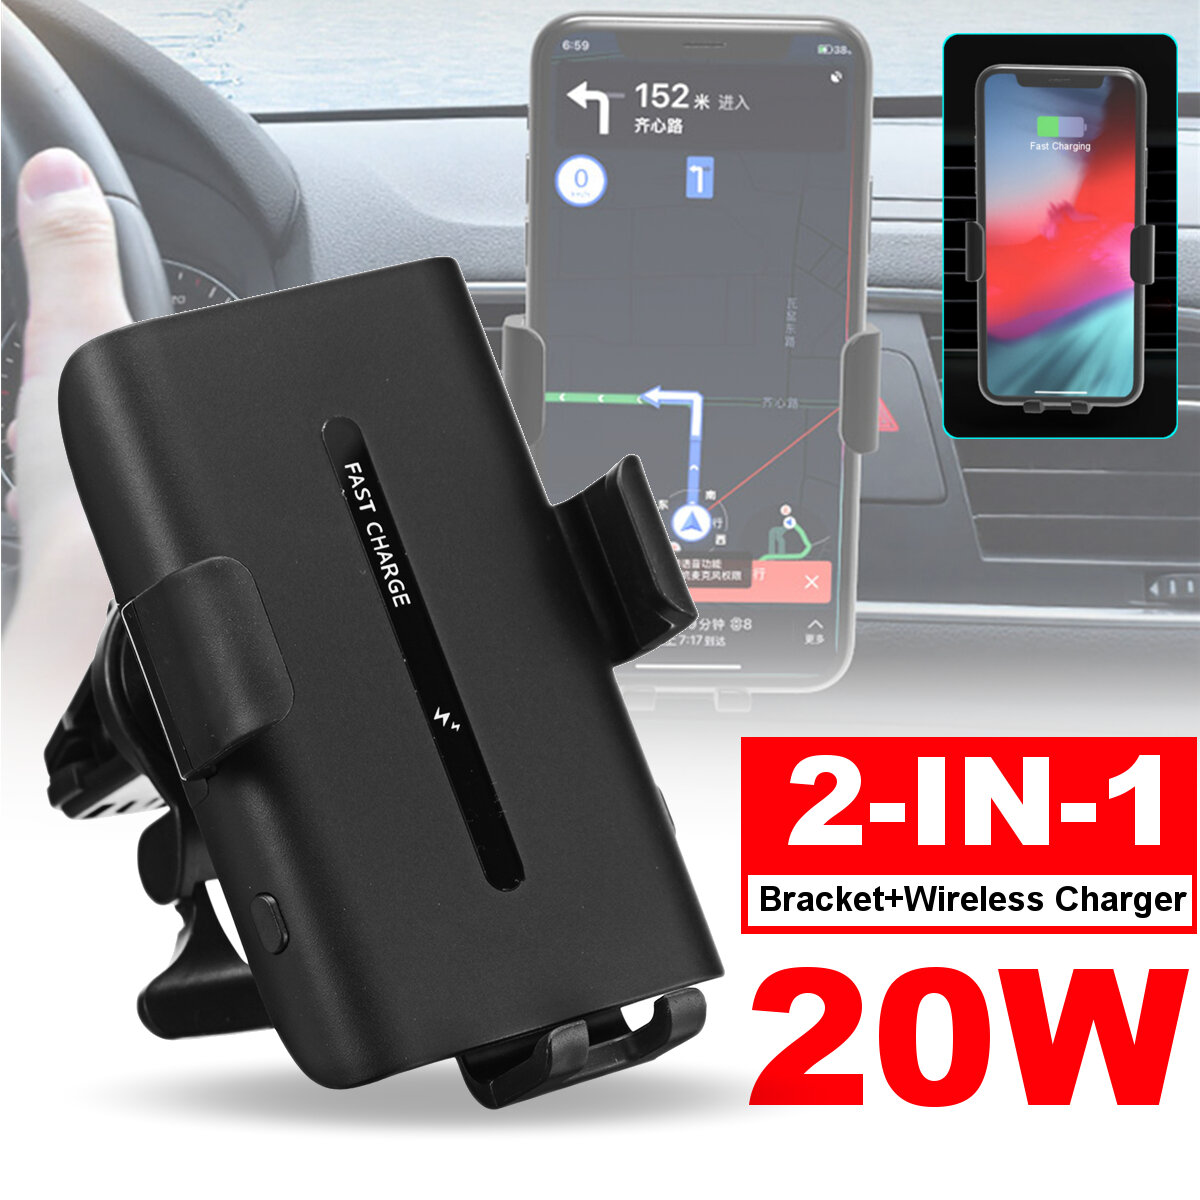 

Universal 360° Rotation 20W Car Air Outlet Qi Wireless Fast Charging Charger Mobile Phone Bracket Holder Stand